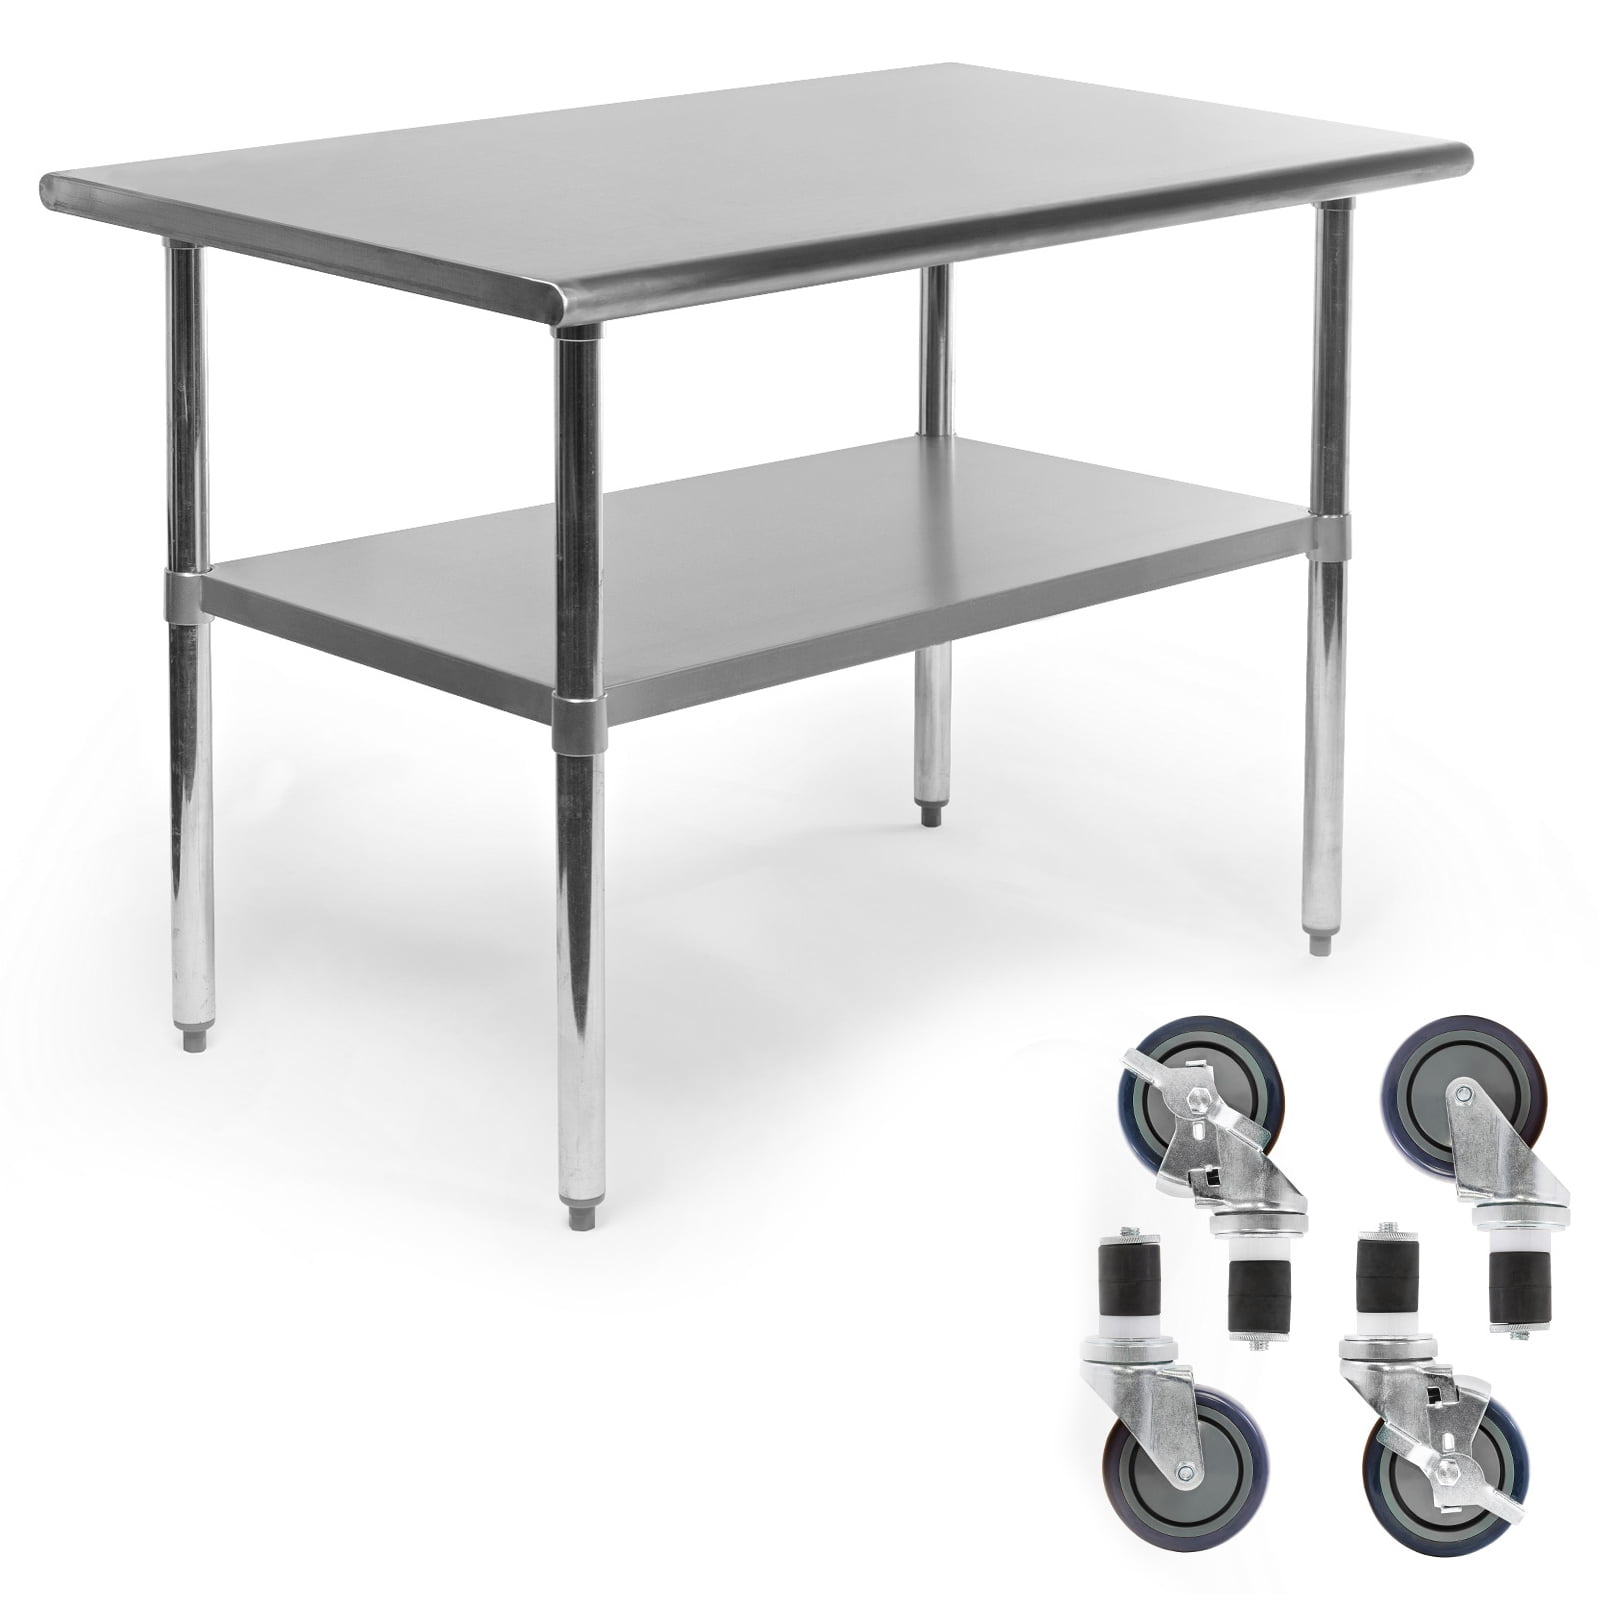 GRIDMANN NSF Stainless Steel Commercial Kitchen Prep & Work Table w/ 4 Stainless Steel Table With Wheels